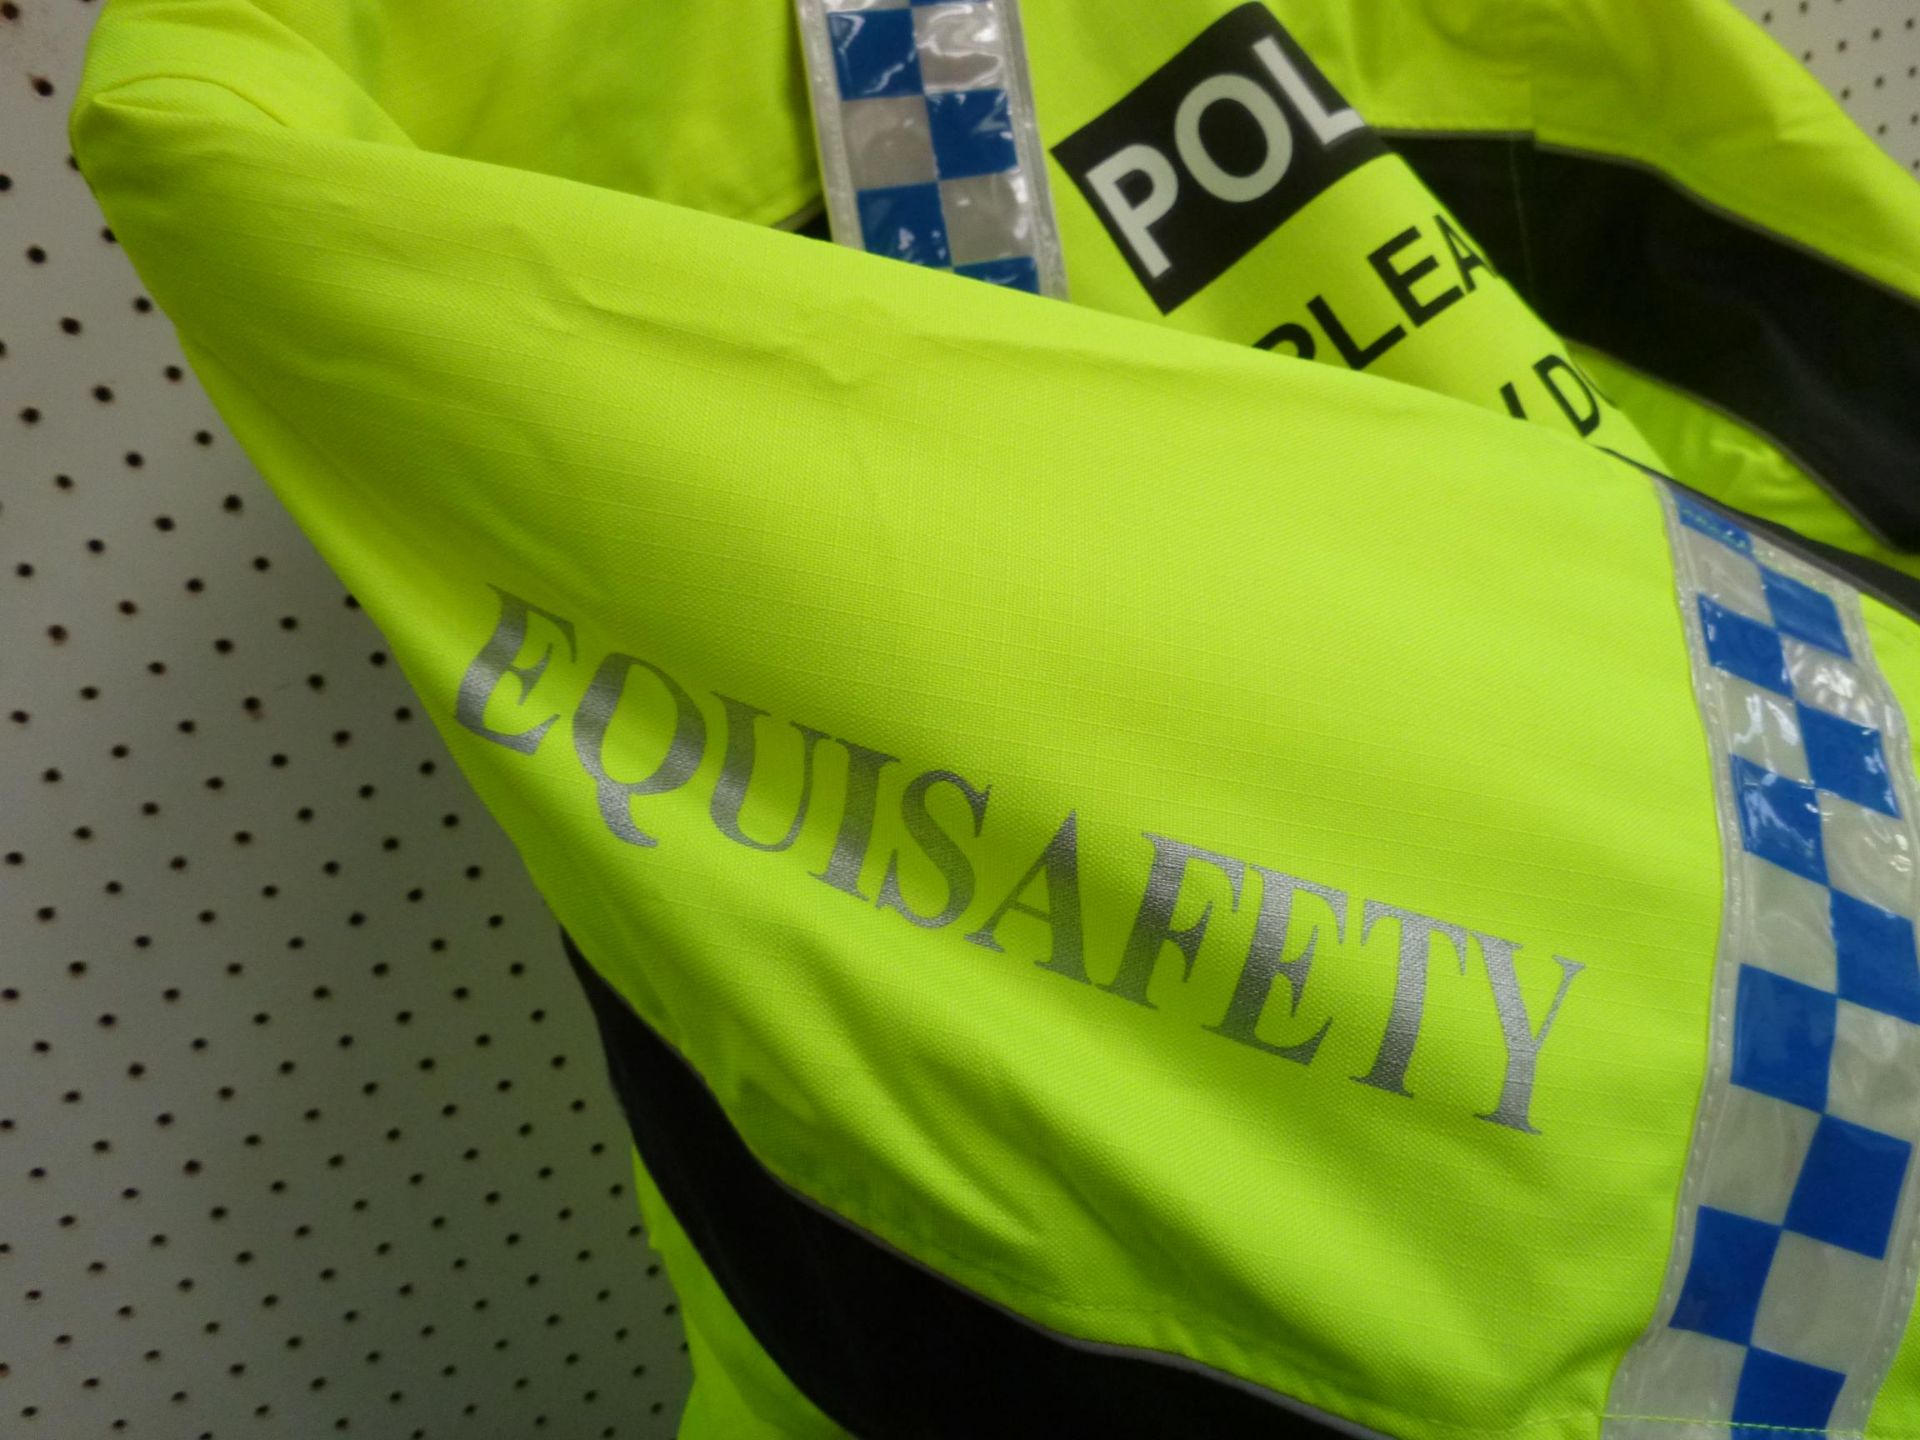 * A New 'Polite' Aspey Jacket 100% Waterproof and Breathable size XX Large (18-20) RRP £86.99 - Bild 3 aus 4